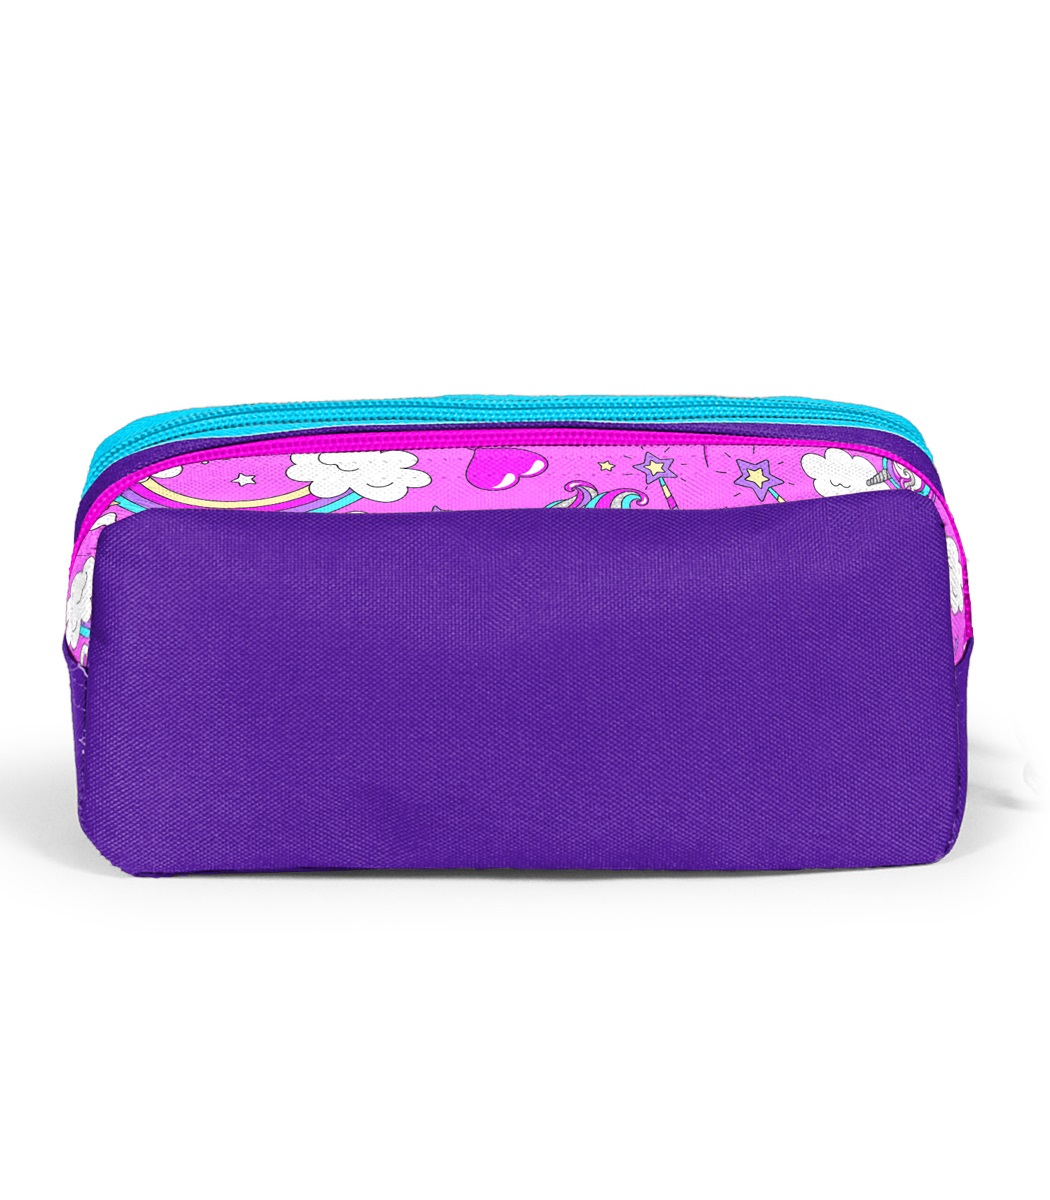 Coral High Kids Two Compartment Pencil case - Purple Light Pink Unicorn Patterned